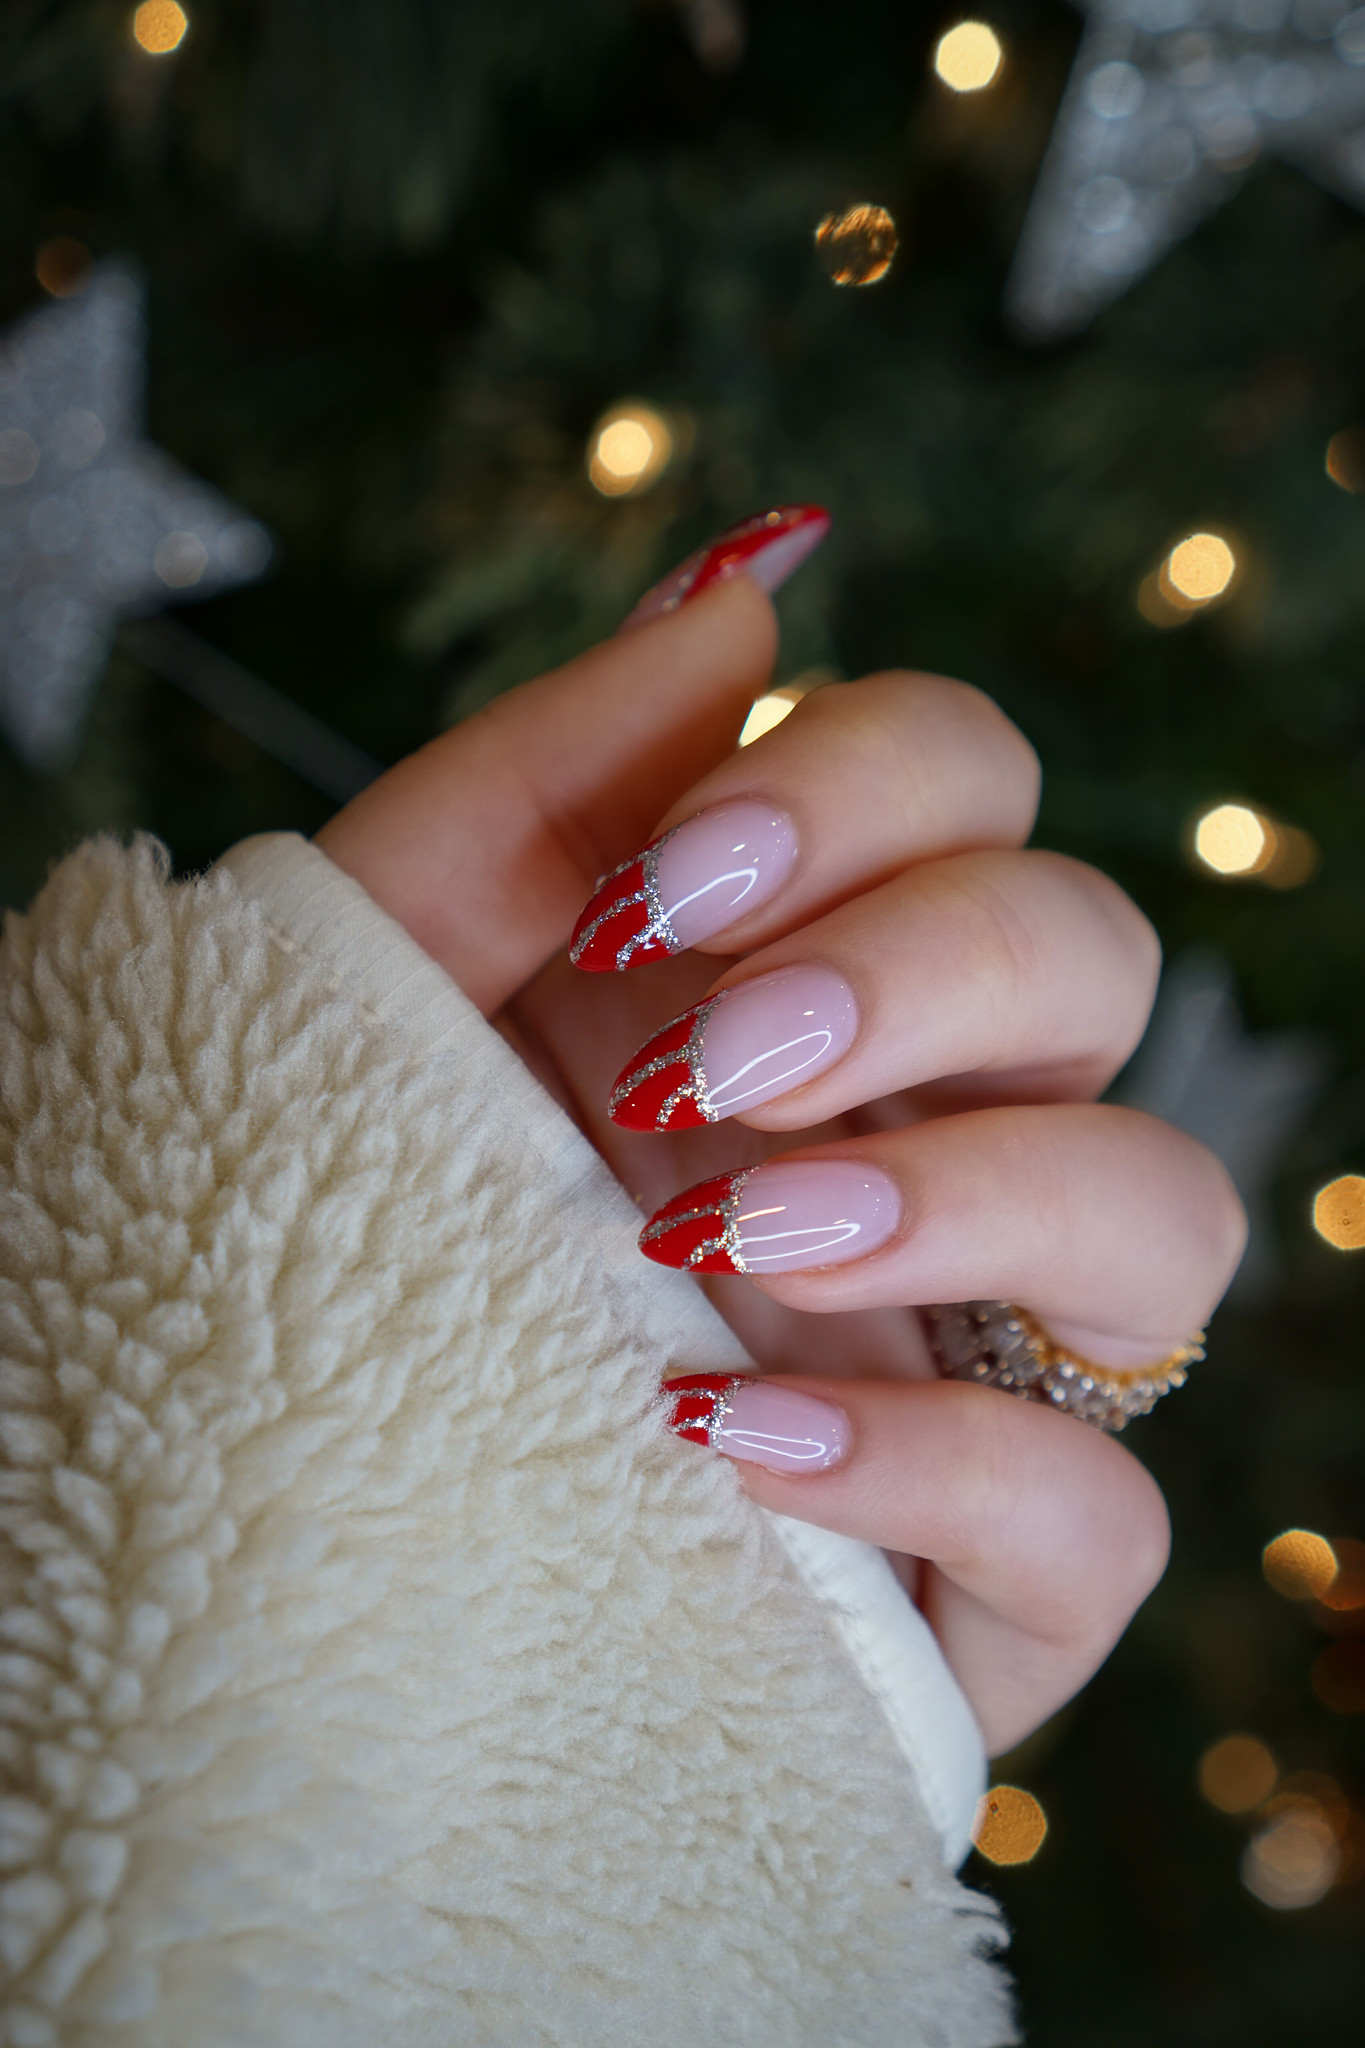 Candy Cane Nails | Red and Silver Christmas Nails | Striped French Manicure Nail Design | Simple Holiday Nails